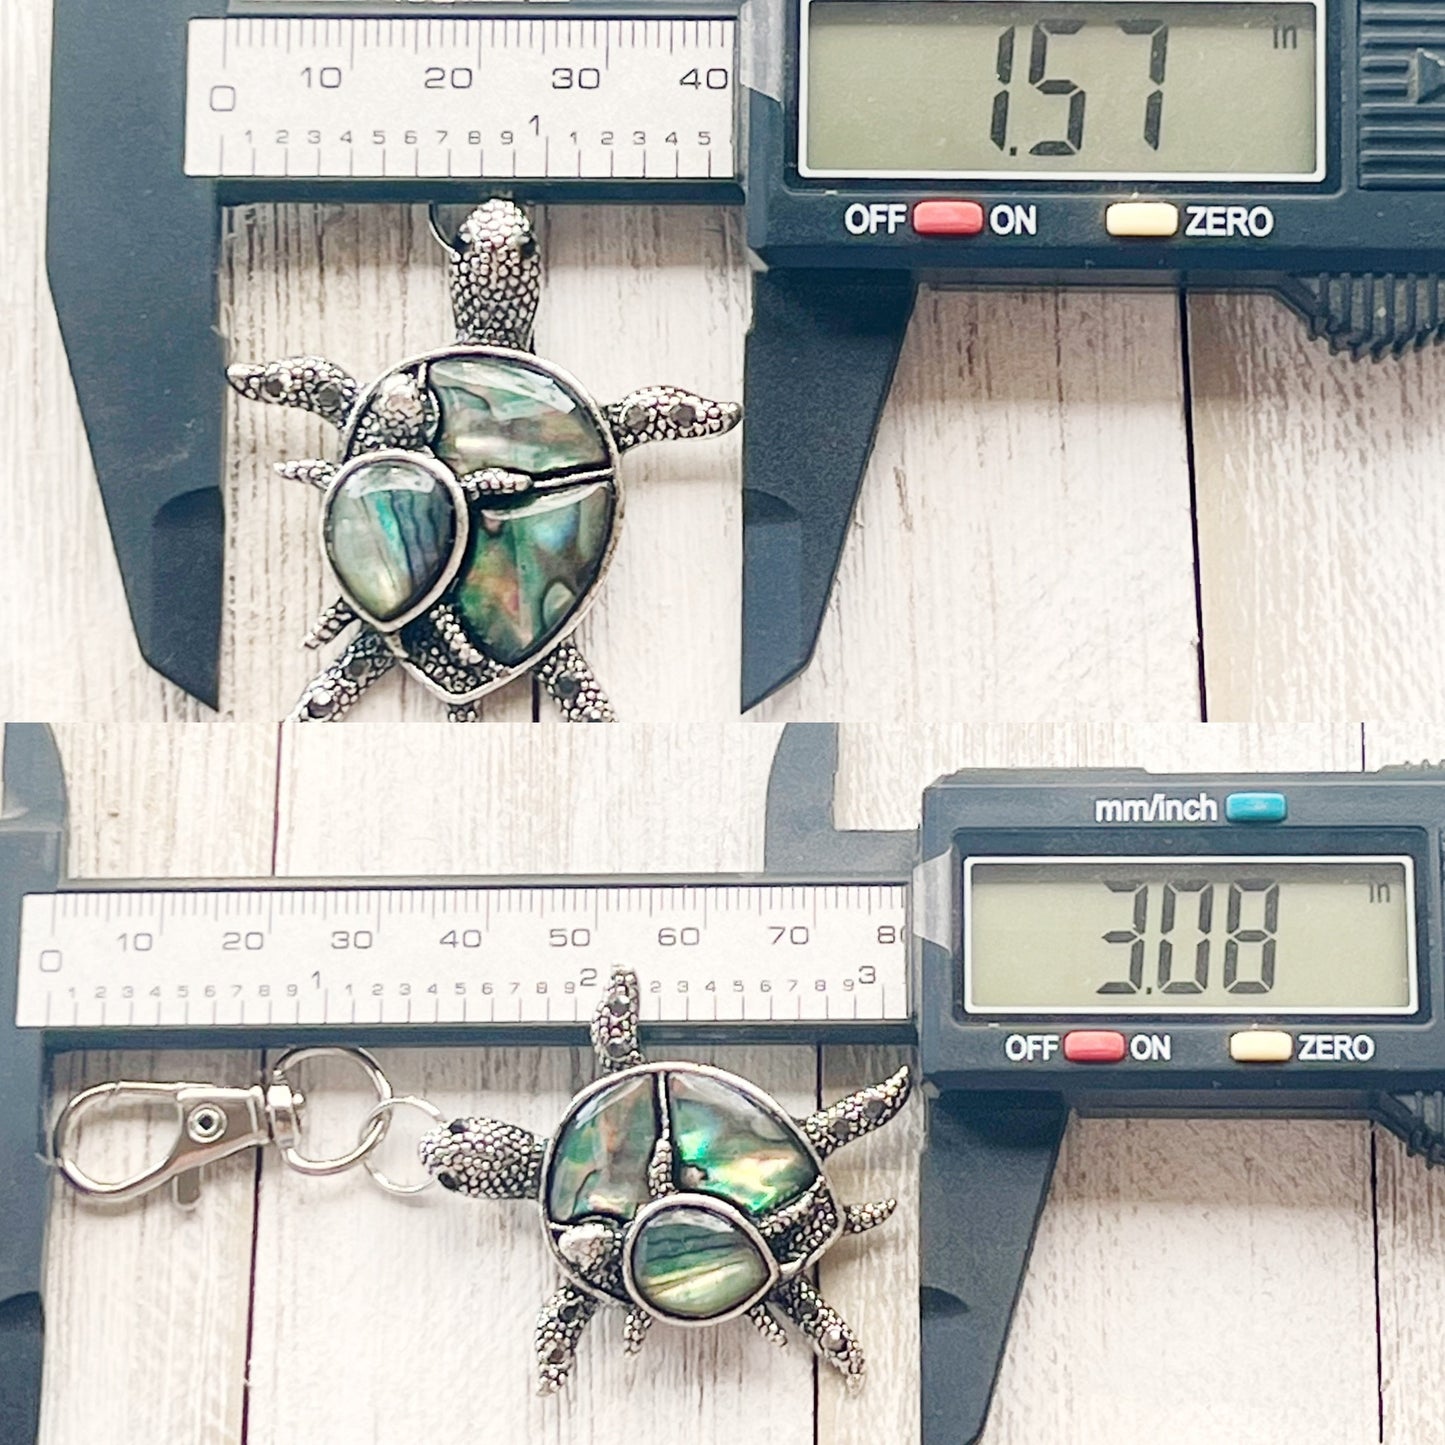 Turtle with Baby Zipper Pull Keychain Purse Charm with Natural Abalone - Adorable Coastal-Inspired Accessory